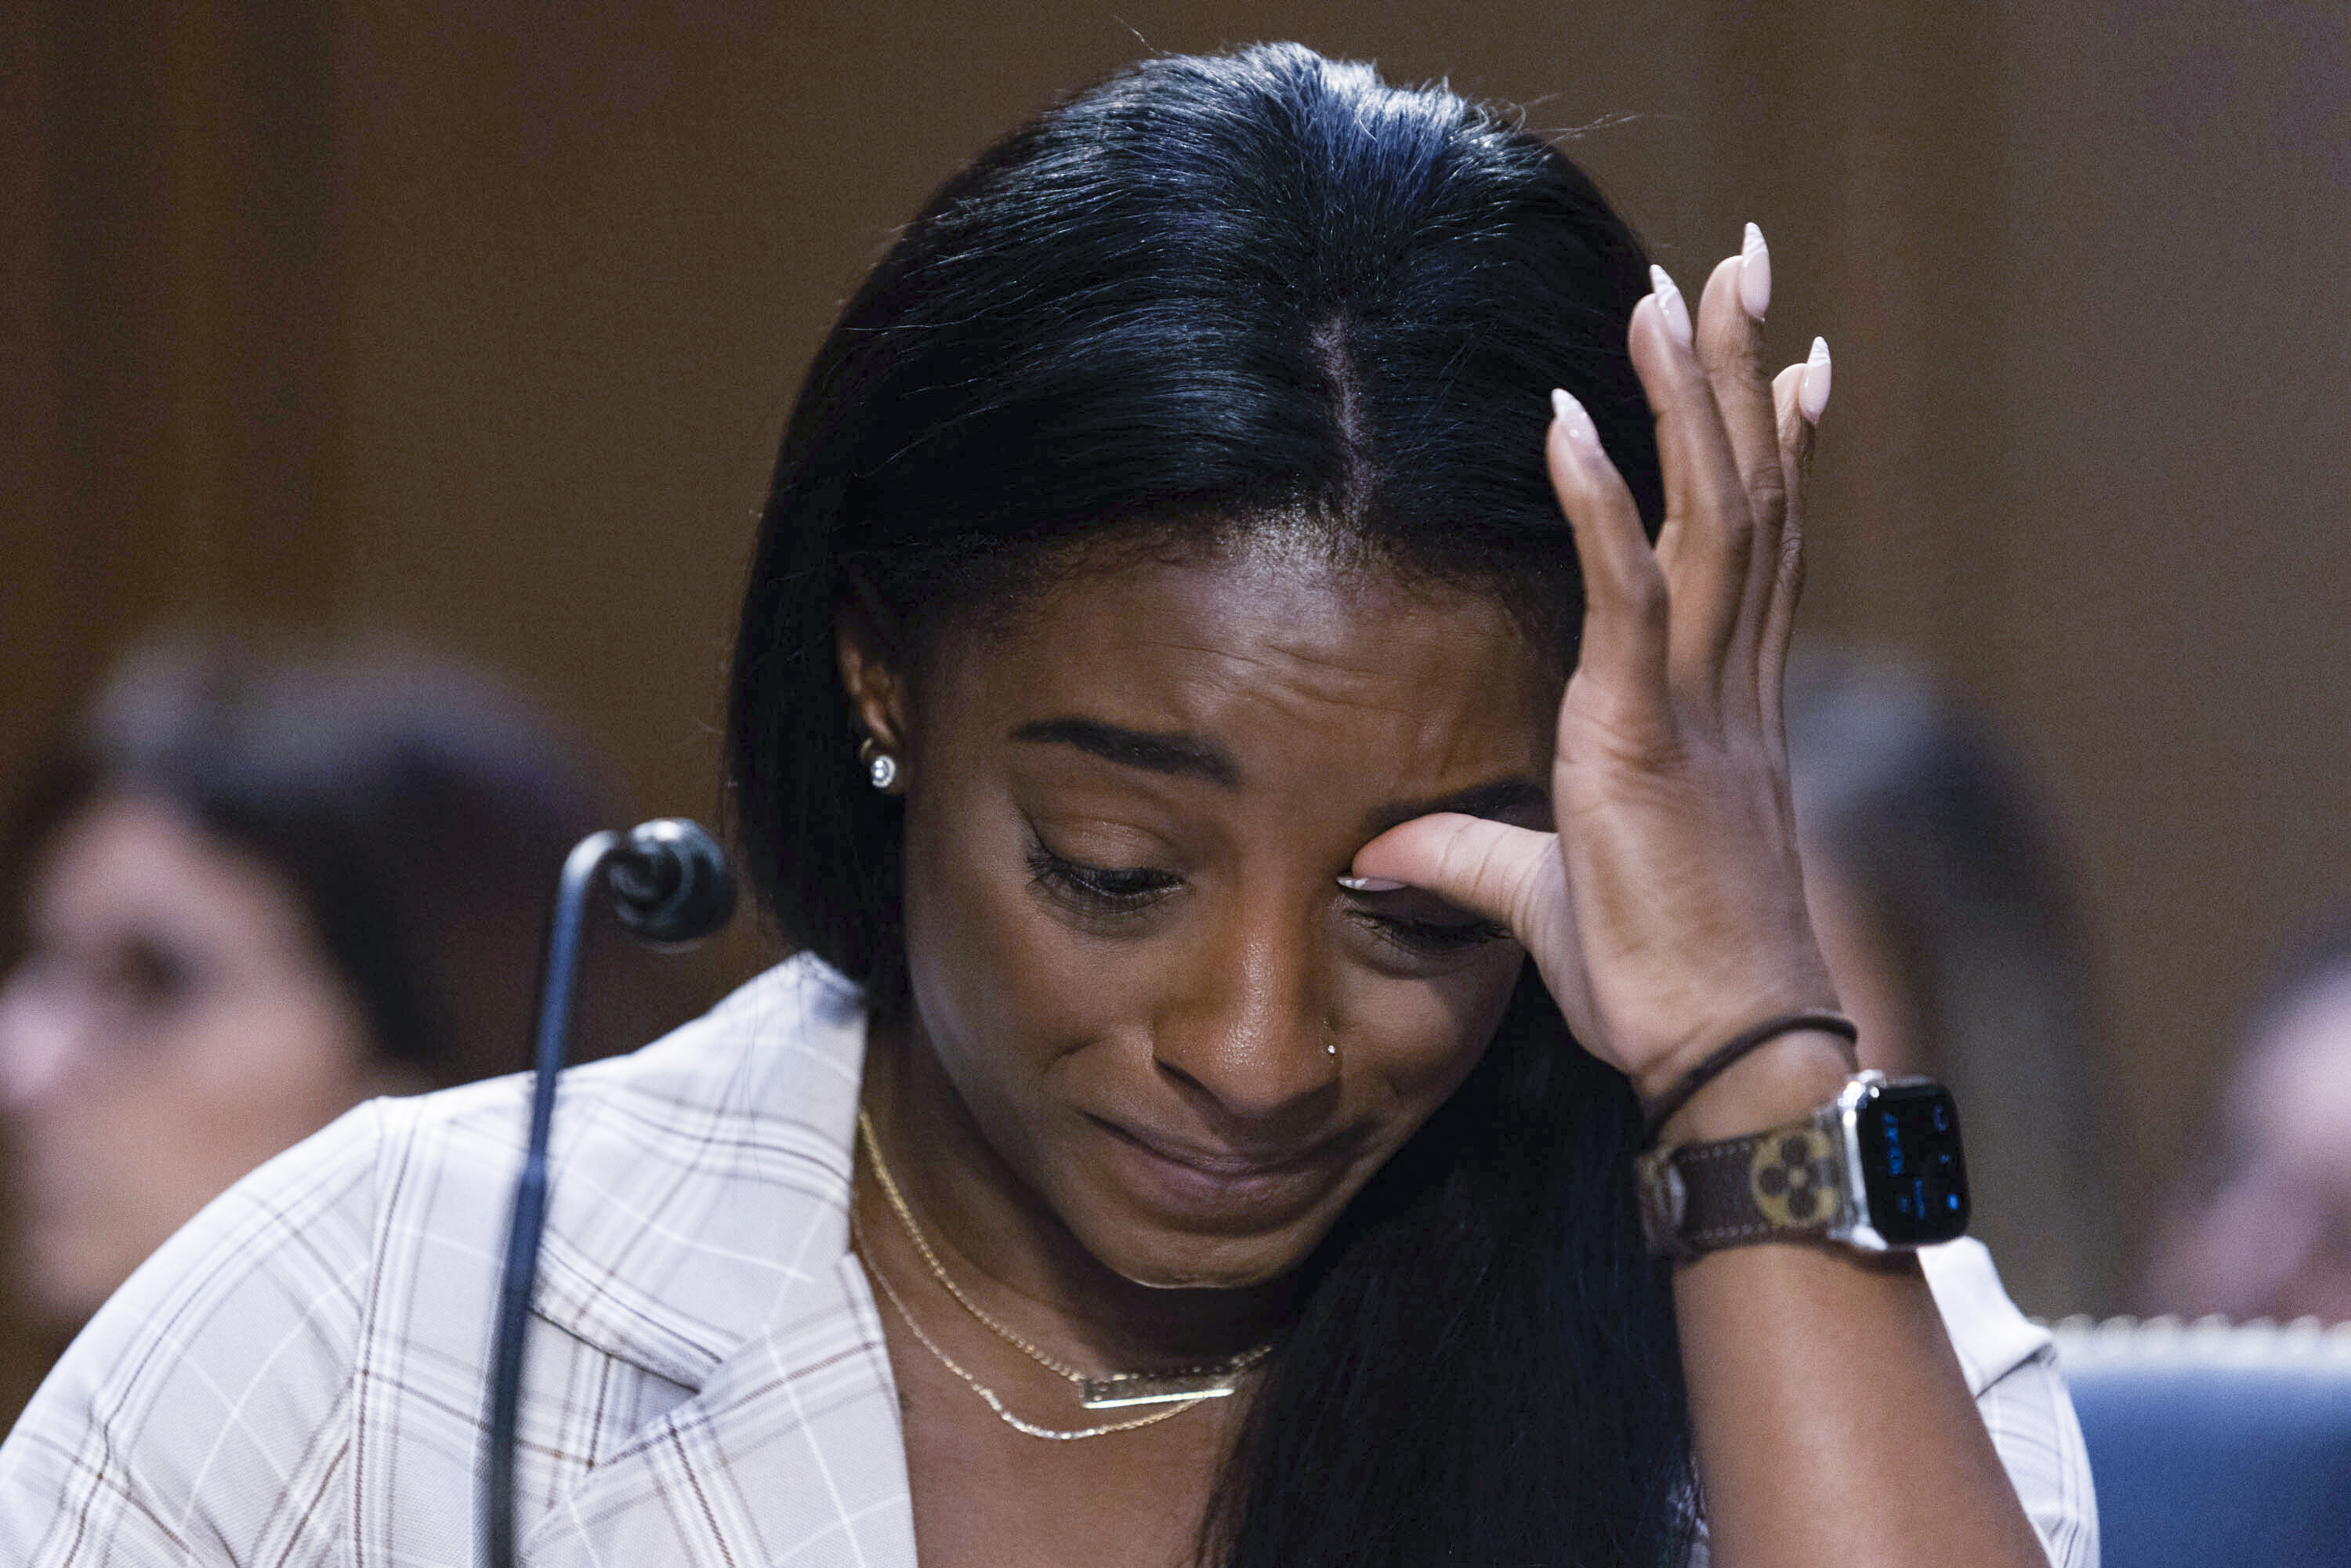 Biles wipes a tear from her eye during her testimony